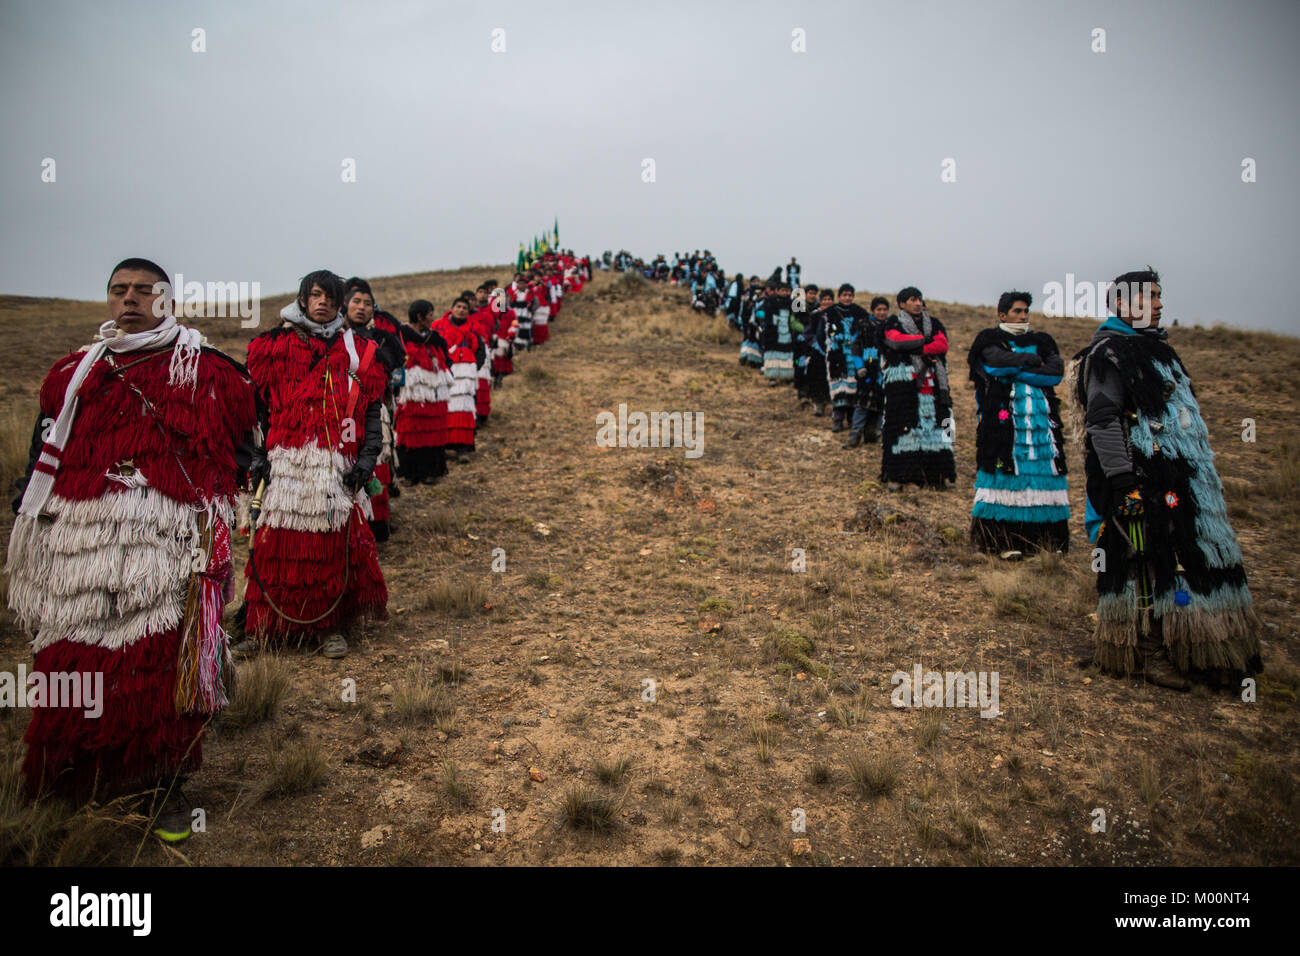 Cusco, Peru. 29th Dec, 2017. Members of the Quispicanchis nation of red and white accompanied by members of the Canchis nation of light blue and black await the sunrise after pilgrimage for 24 hours from the Hoyada de Sinancara to Mahuayani.Quyllur Rit'i or Star Snow Festival is a spiritual and religious festival held Annually at the Sinakara Valley in the Cusco Region of Peru. Groups of Quero indigenous people climb Ausangate Mountain, at 6362m, in search of the Snow Star Which is reputedly buried Within the mountain.According to the chroniclers, the Qoyllur Rit'i is the Christ that th Stock Photo